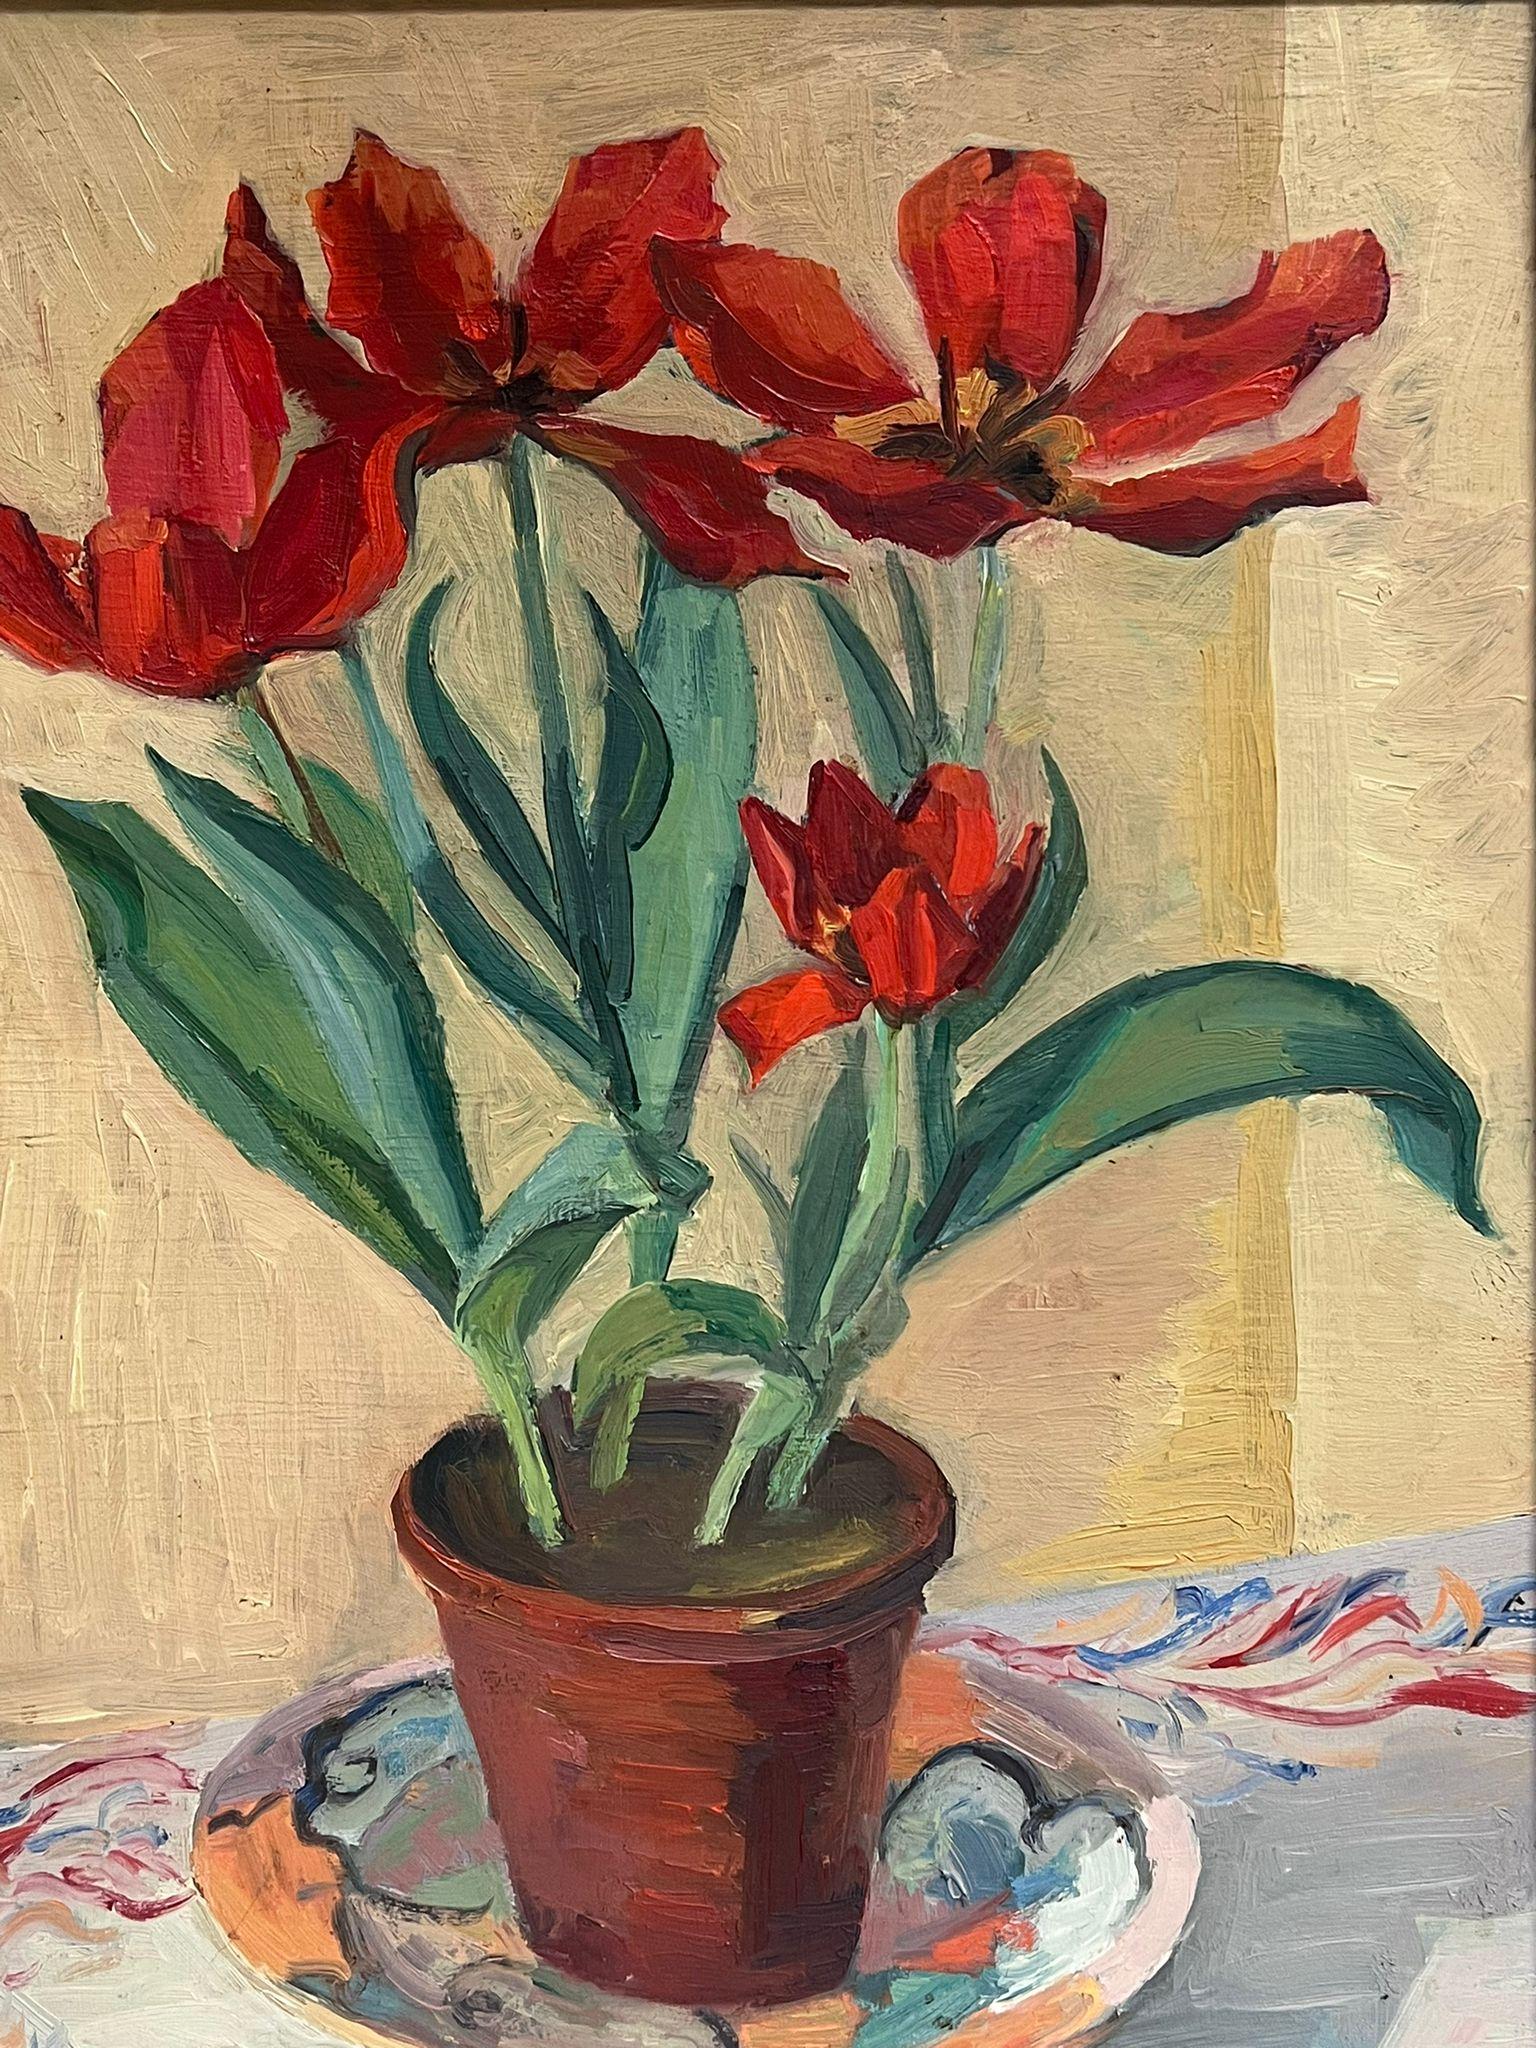 Red Tulips in Interior
by Marcel Chesneau (French 1902 - 1975)
signed oil on canvas, framed
framed: 26 x 19 inches
canvas: 22 x 15 inches
provenance: private collection, France
condition: very good and sound condition